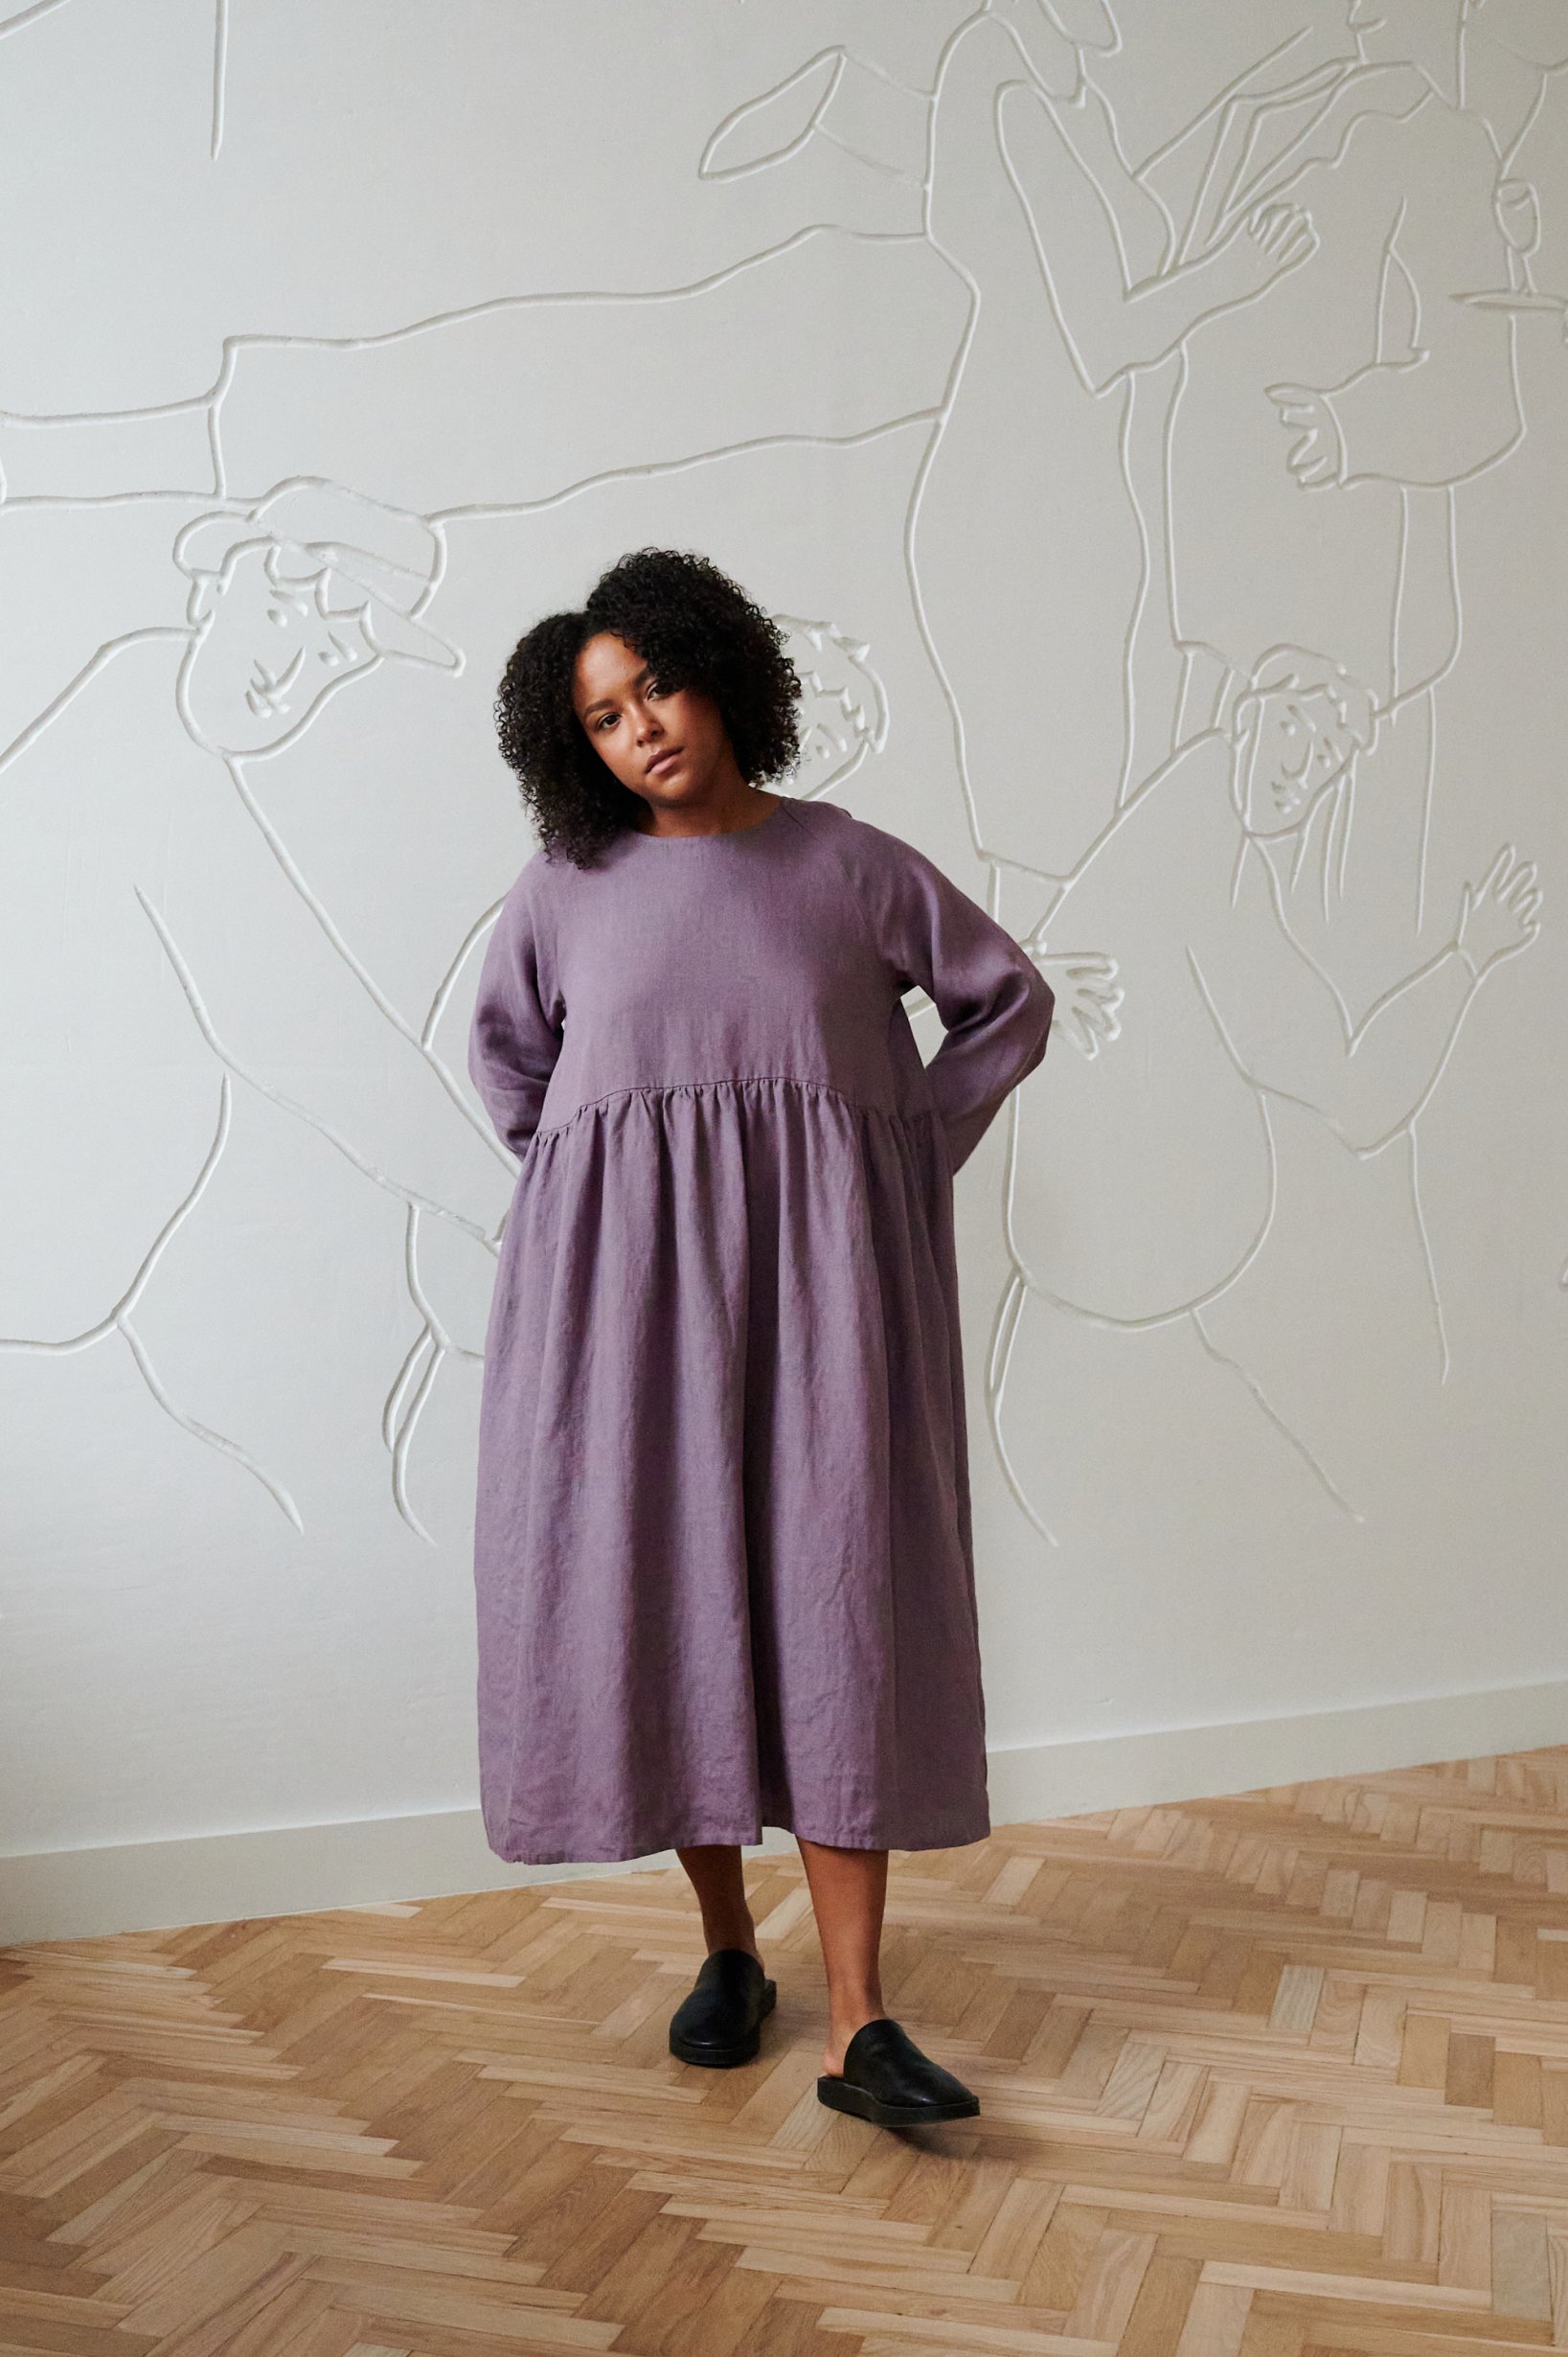 Stone washed linen dress in purple color